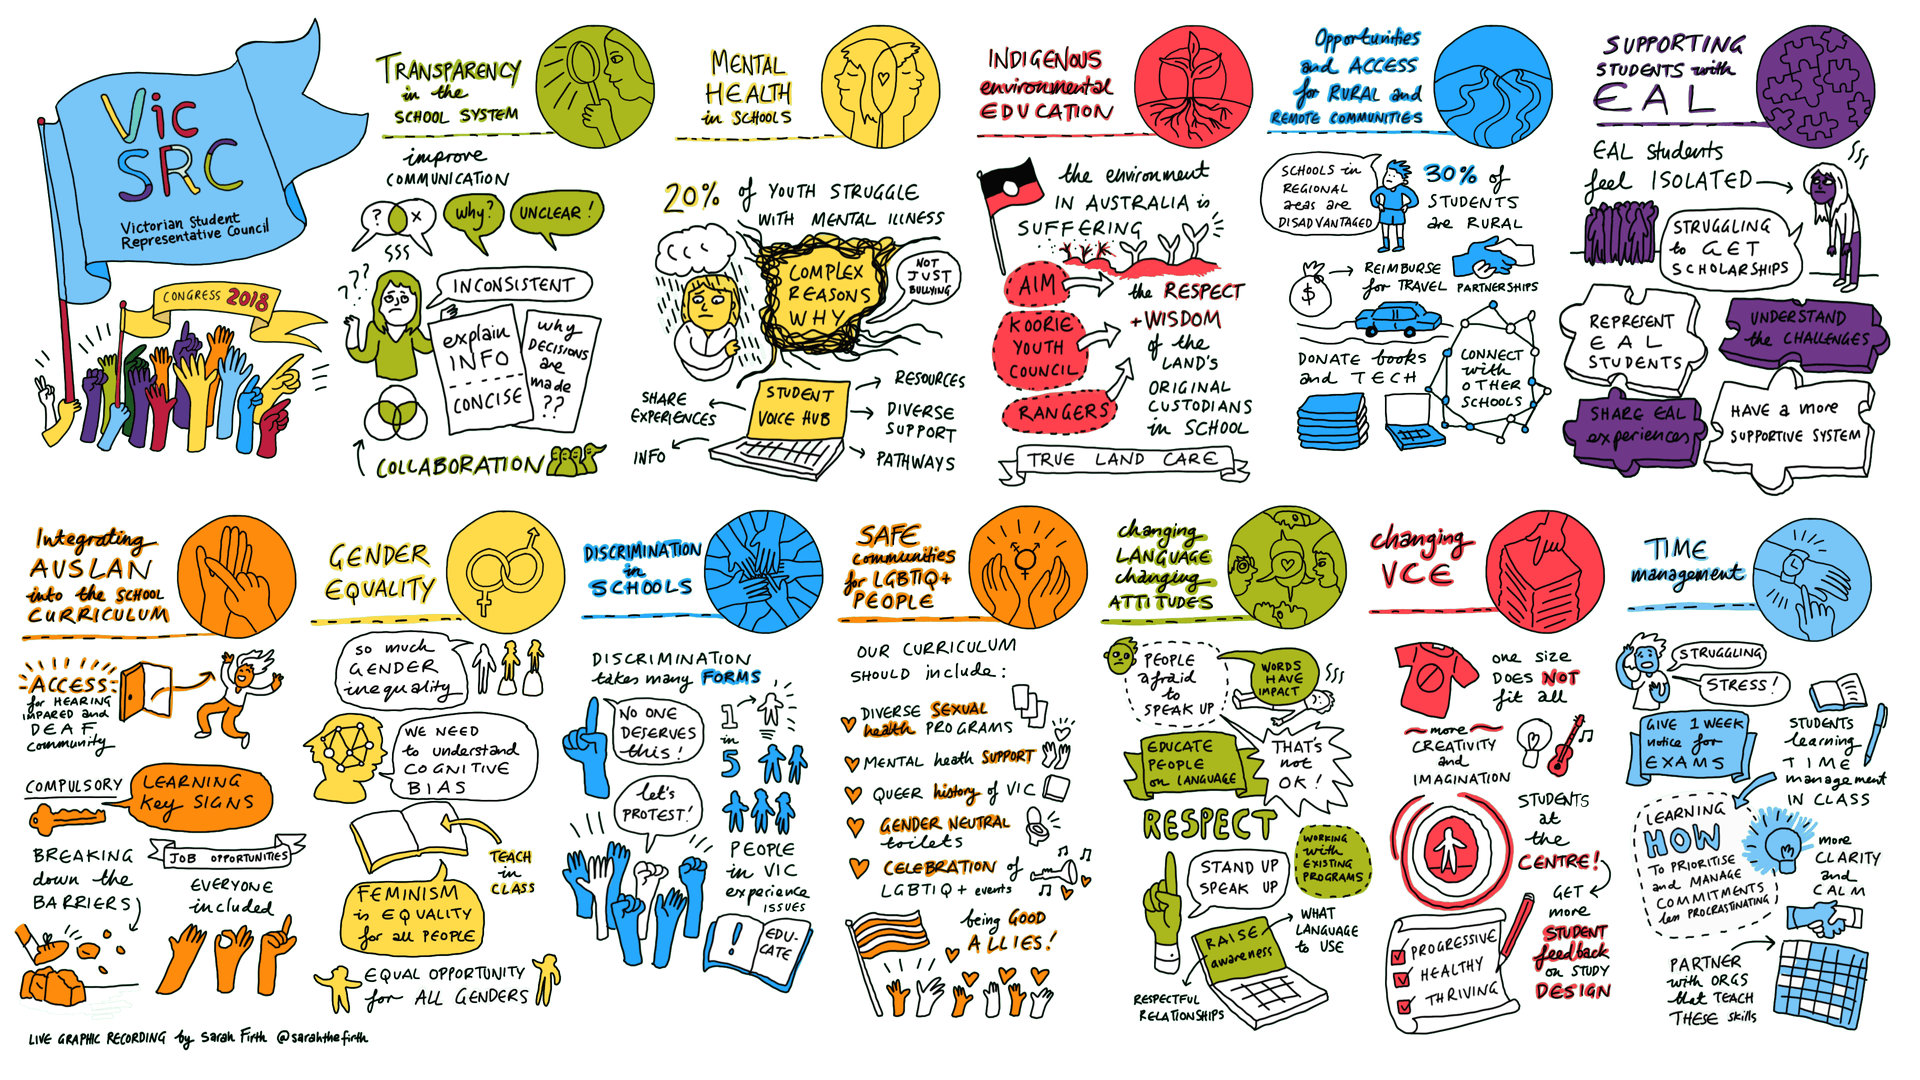 Graphic facilitation of the issues and ideas discussed at Congress 2018.